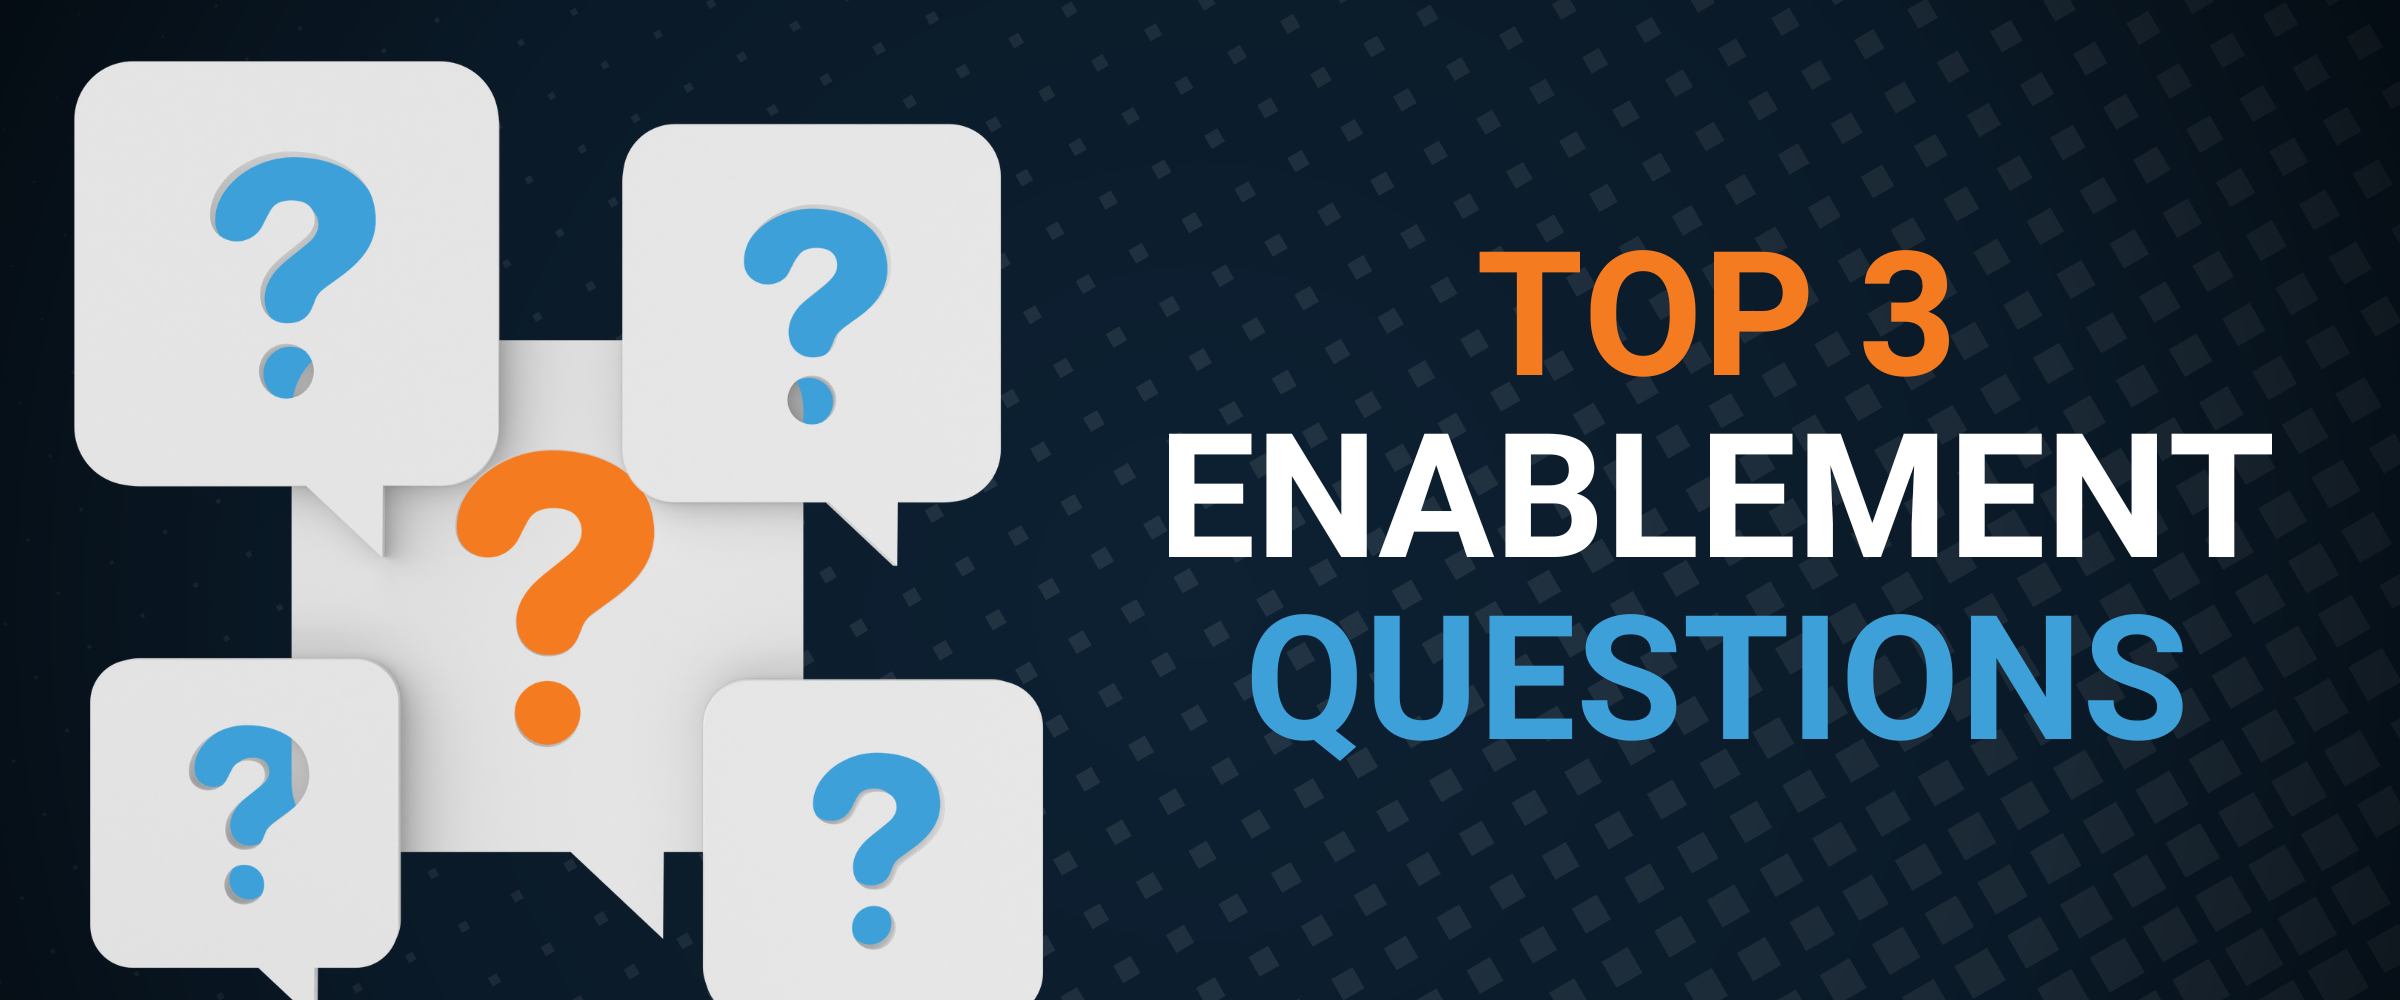 Top 3 Enablement Questions